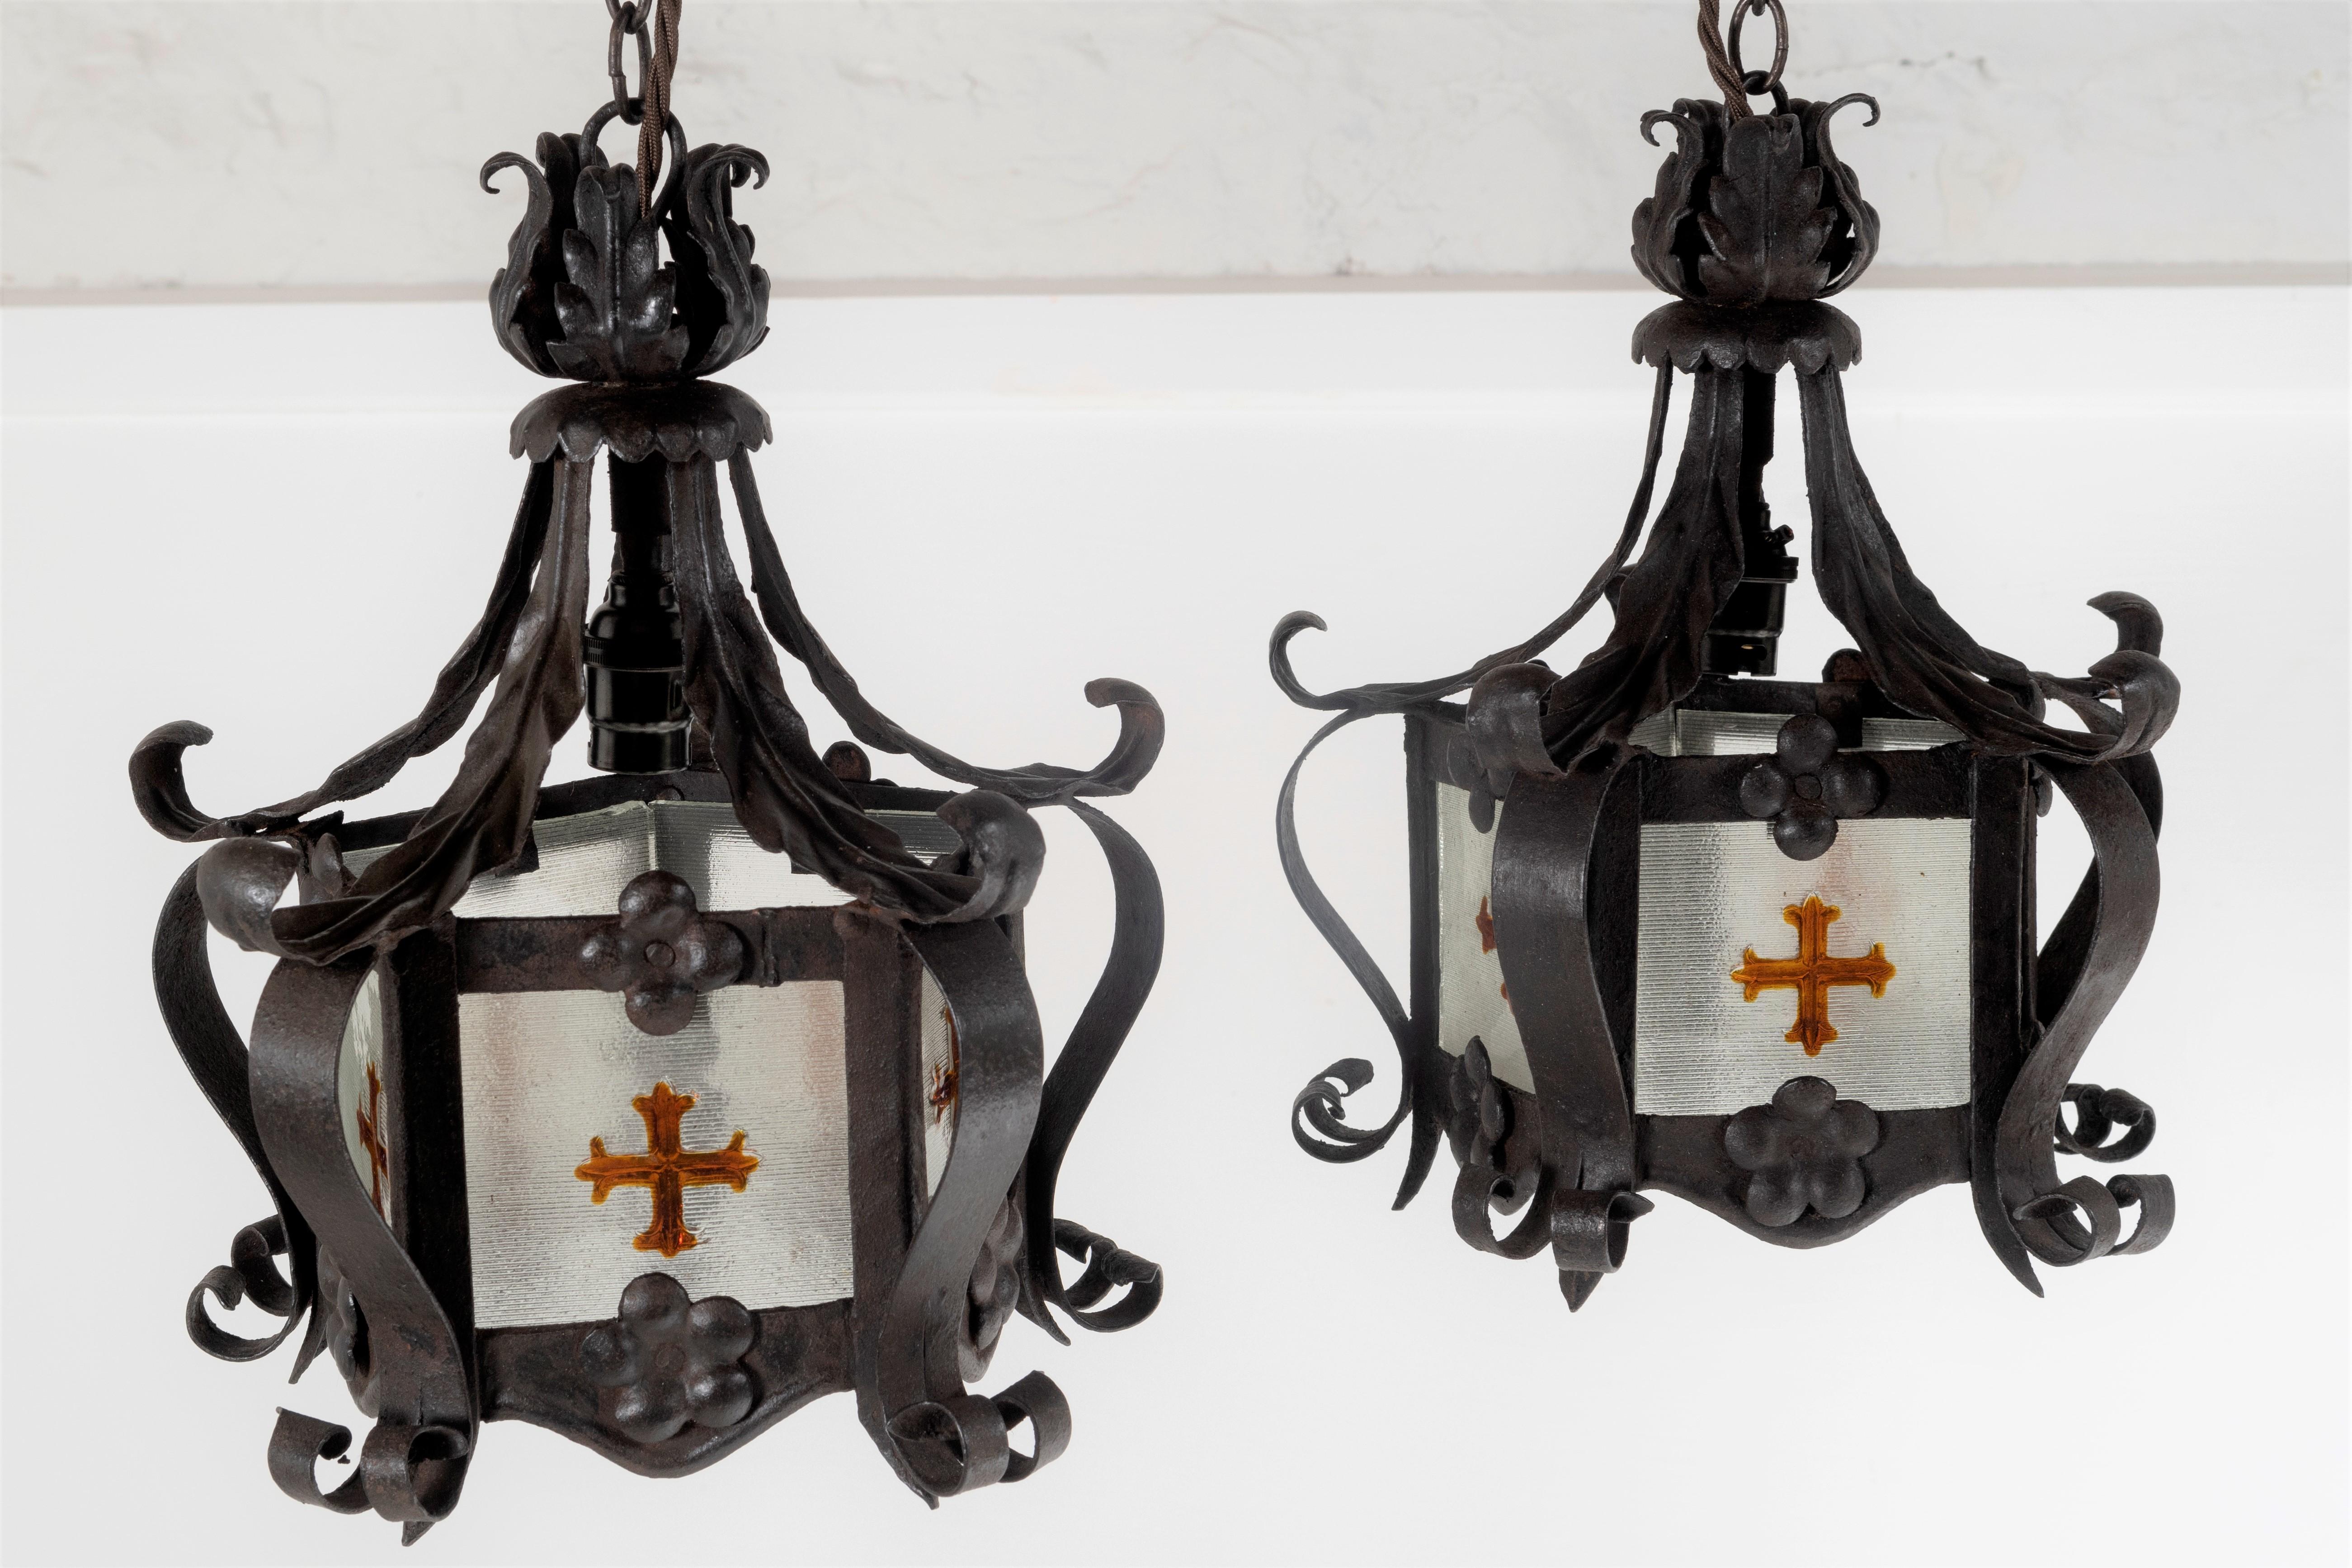 Pair of Glazed 19th C, Aesthetic Lantern Pendants with Gothic Stained Glass For Sale 3